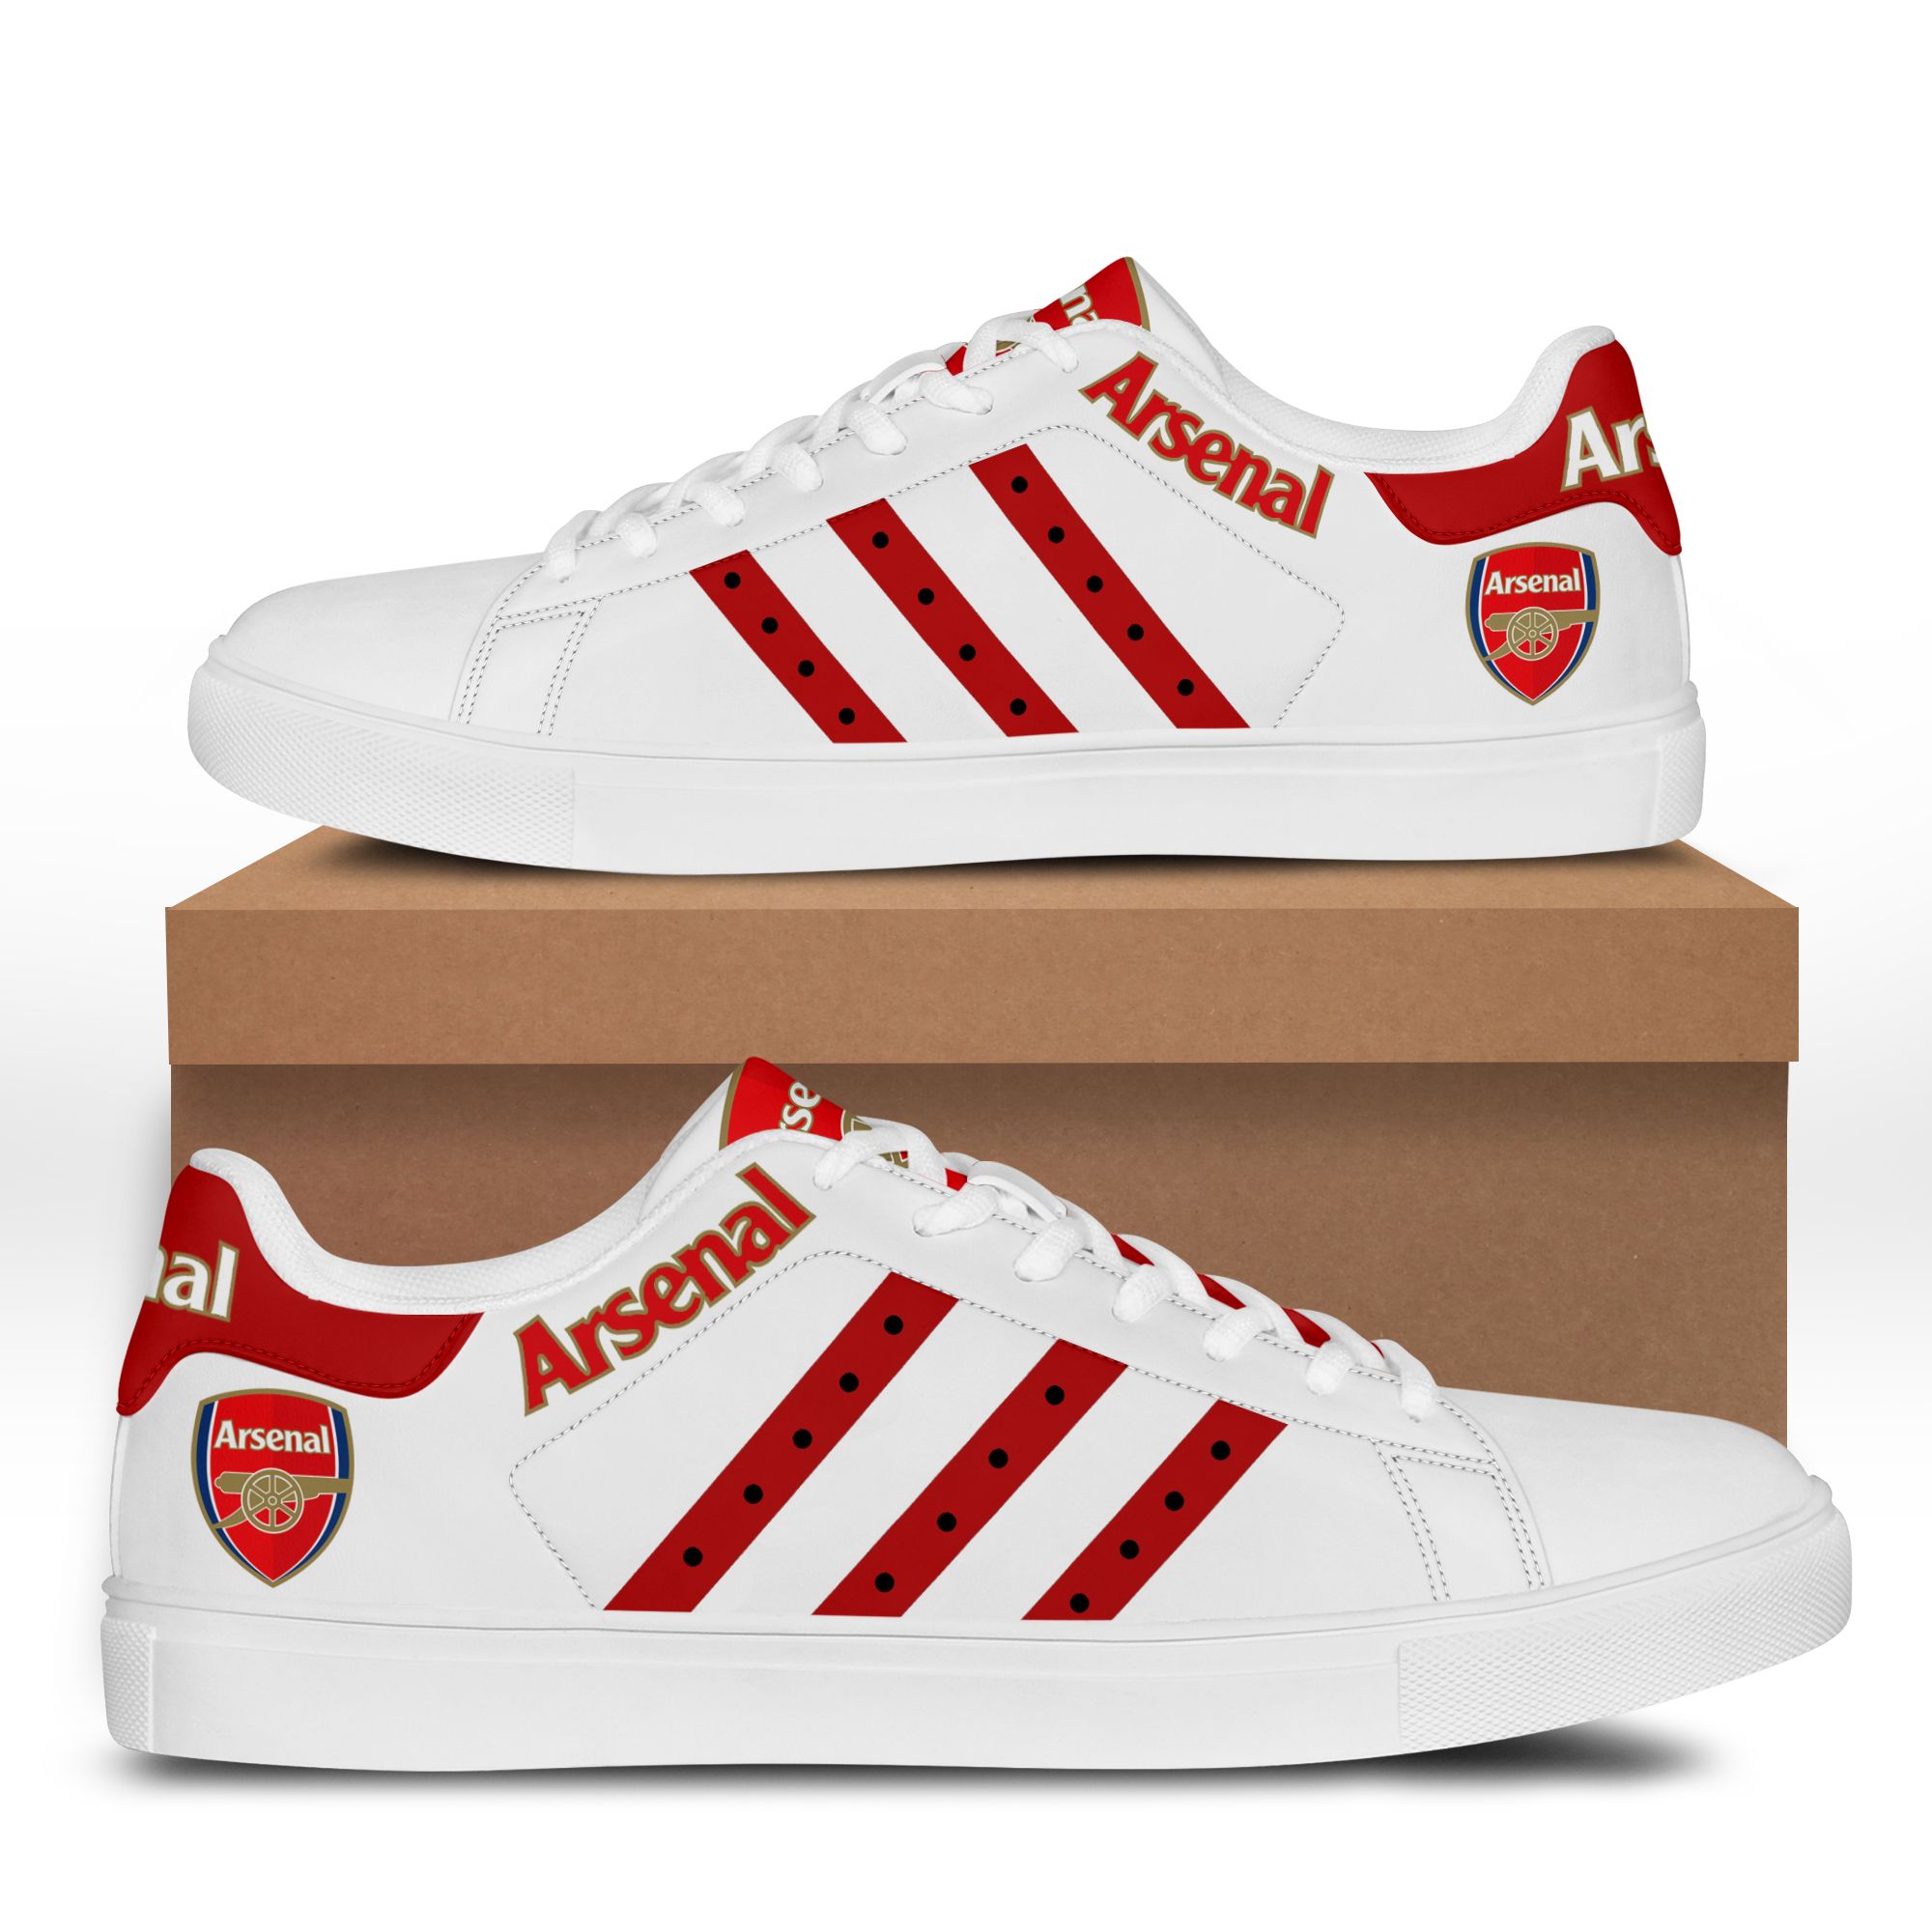 Arsenal stan smith low top shoes – LIMITED EDITION